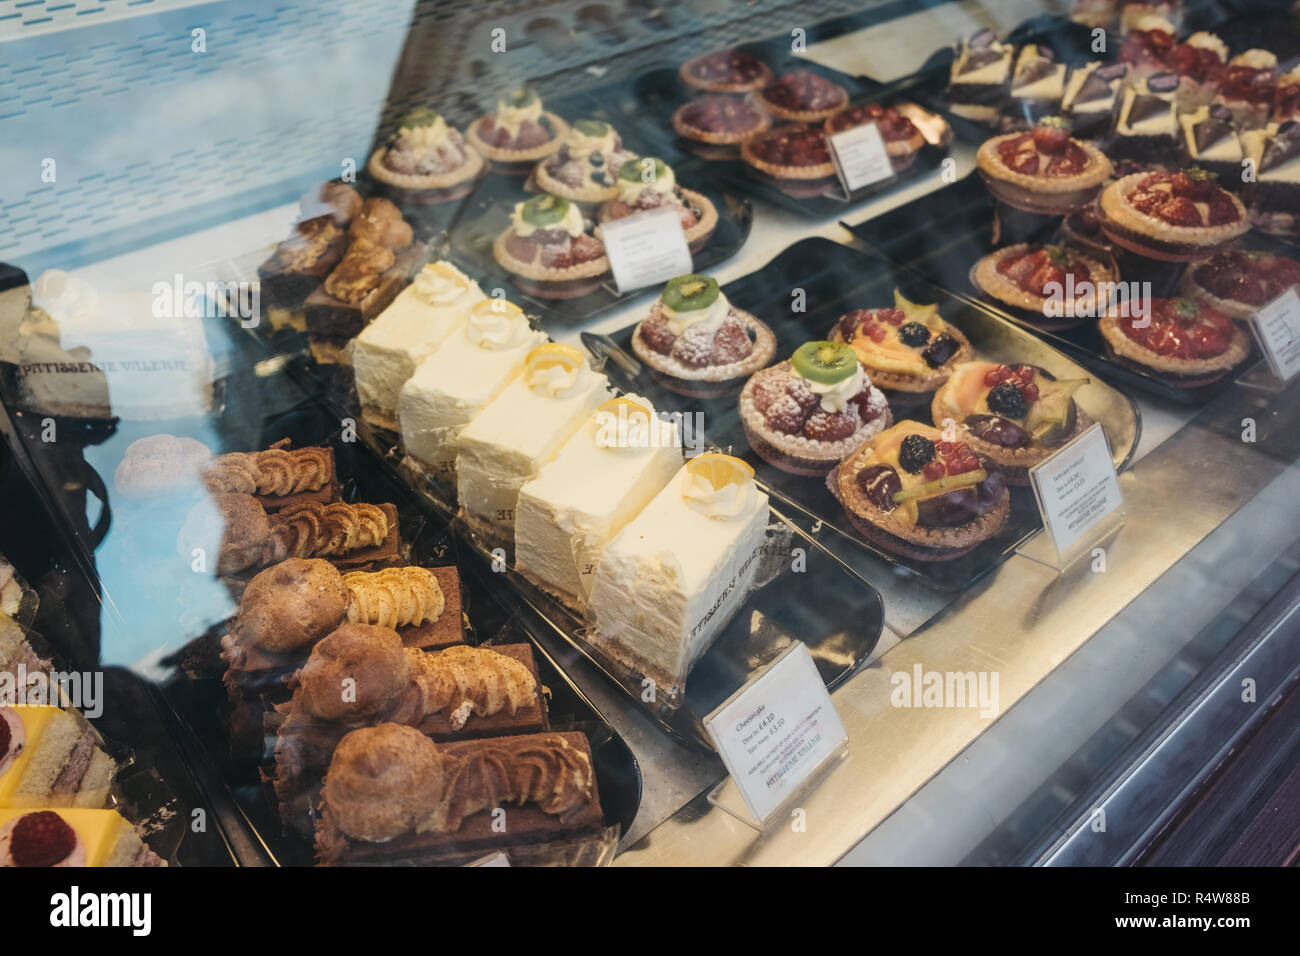 London, UK - November 21, 2018: Close up of cakes in the window display of Patisserie Valerie, a popular chain of coffee shops in London, UK. View fro Stock Photo